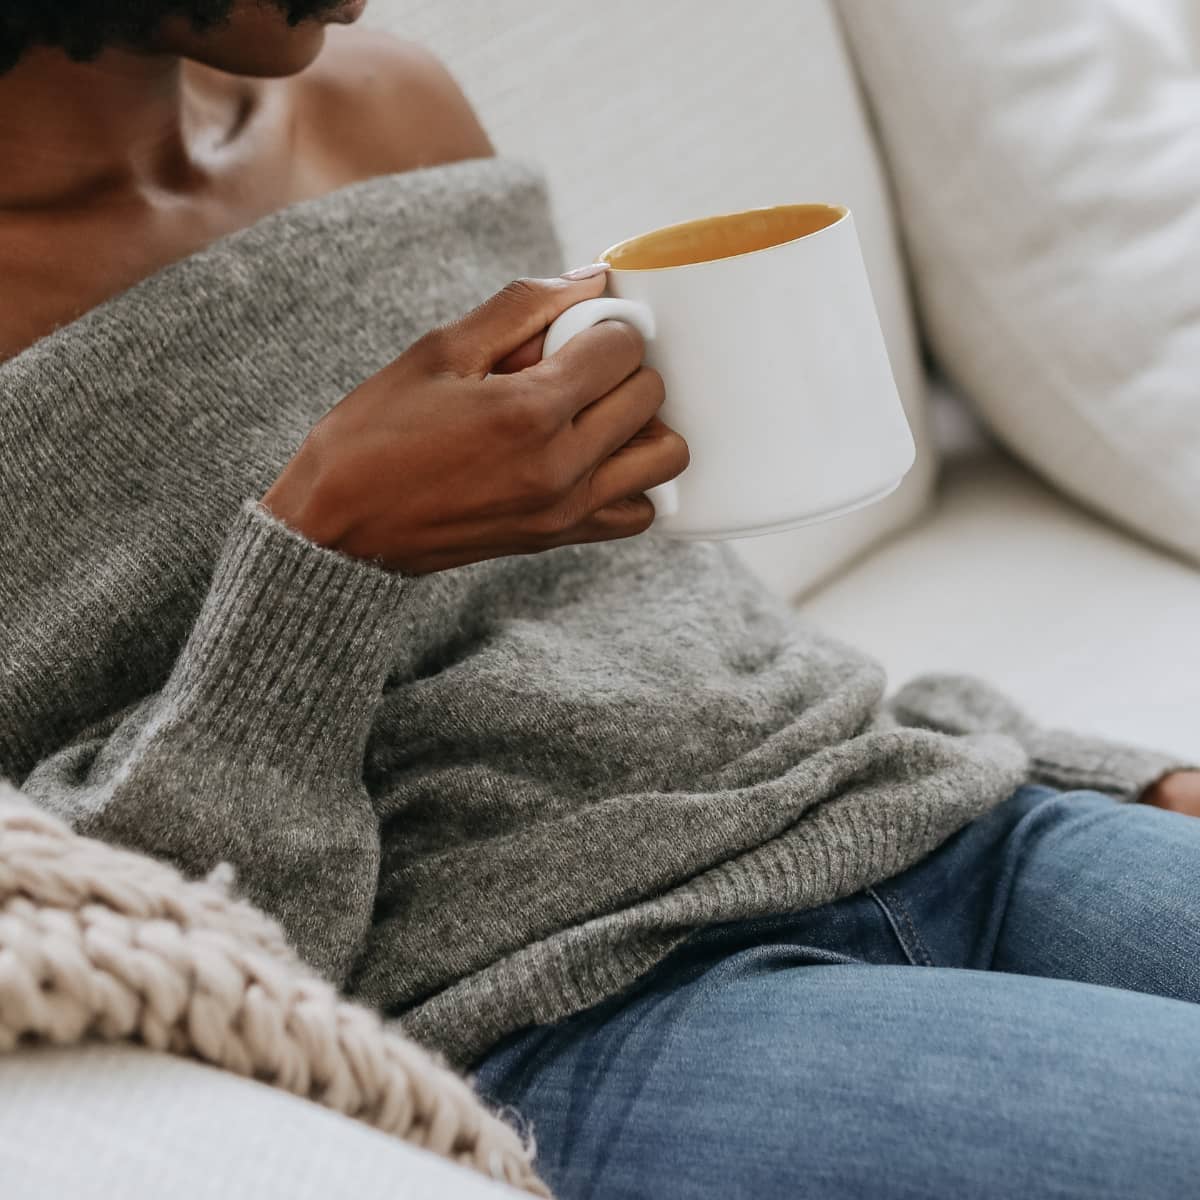 A woman wearing a grey sweater and jeans sitting on a sofa holding a cup of coffee